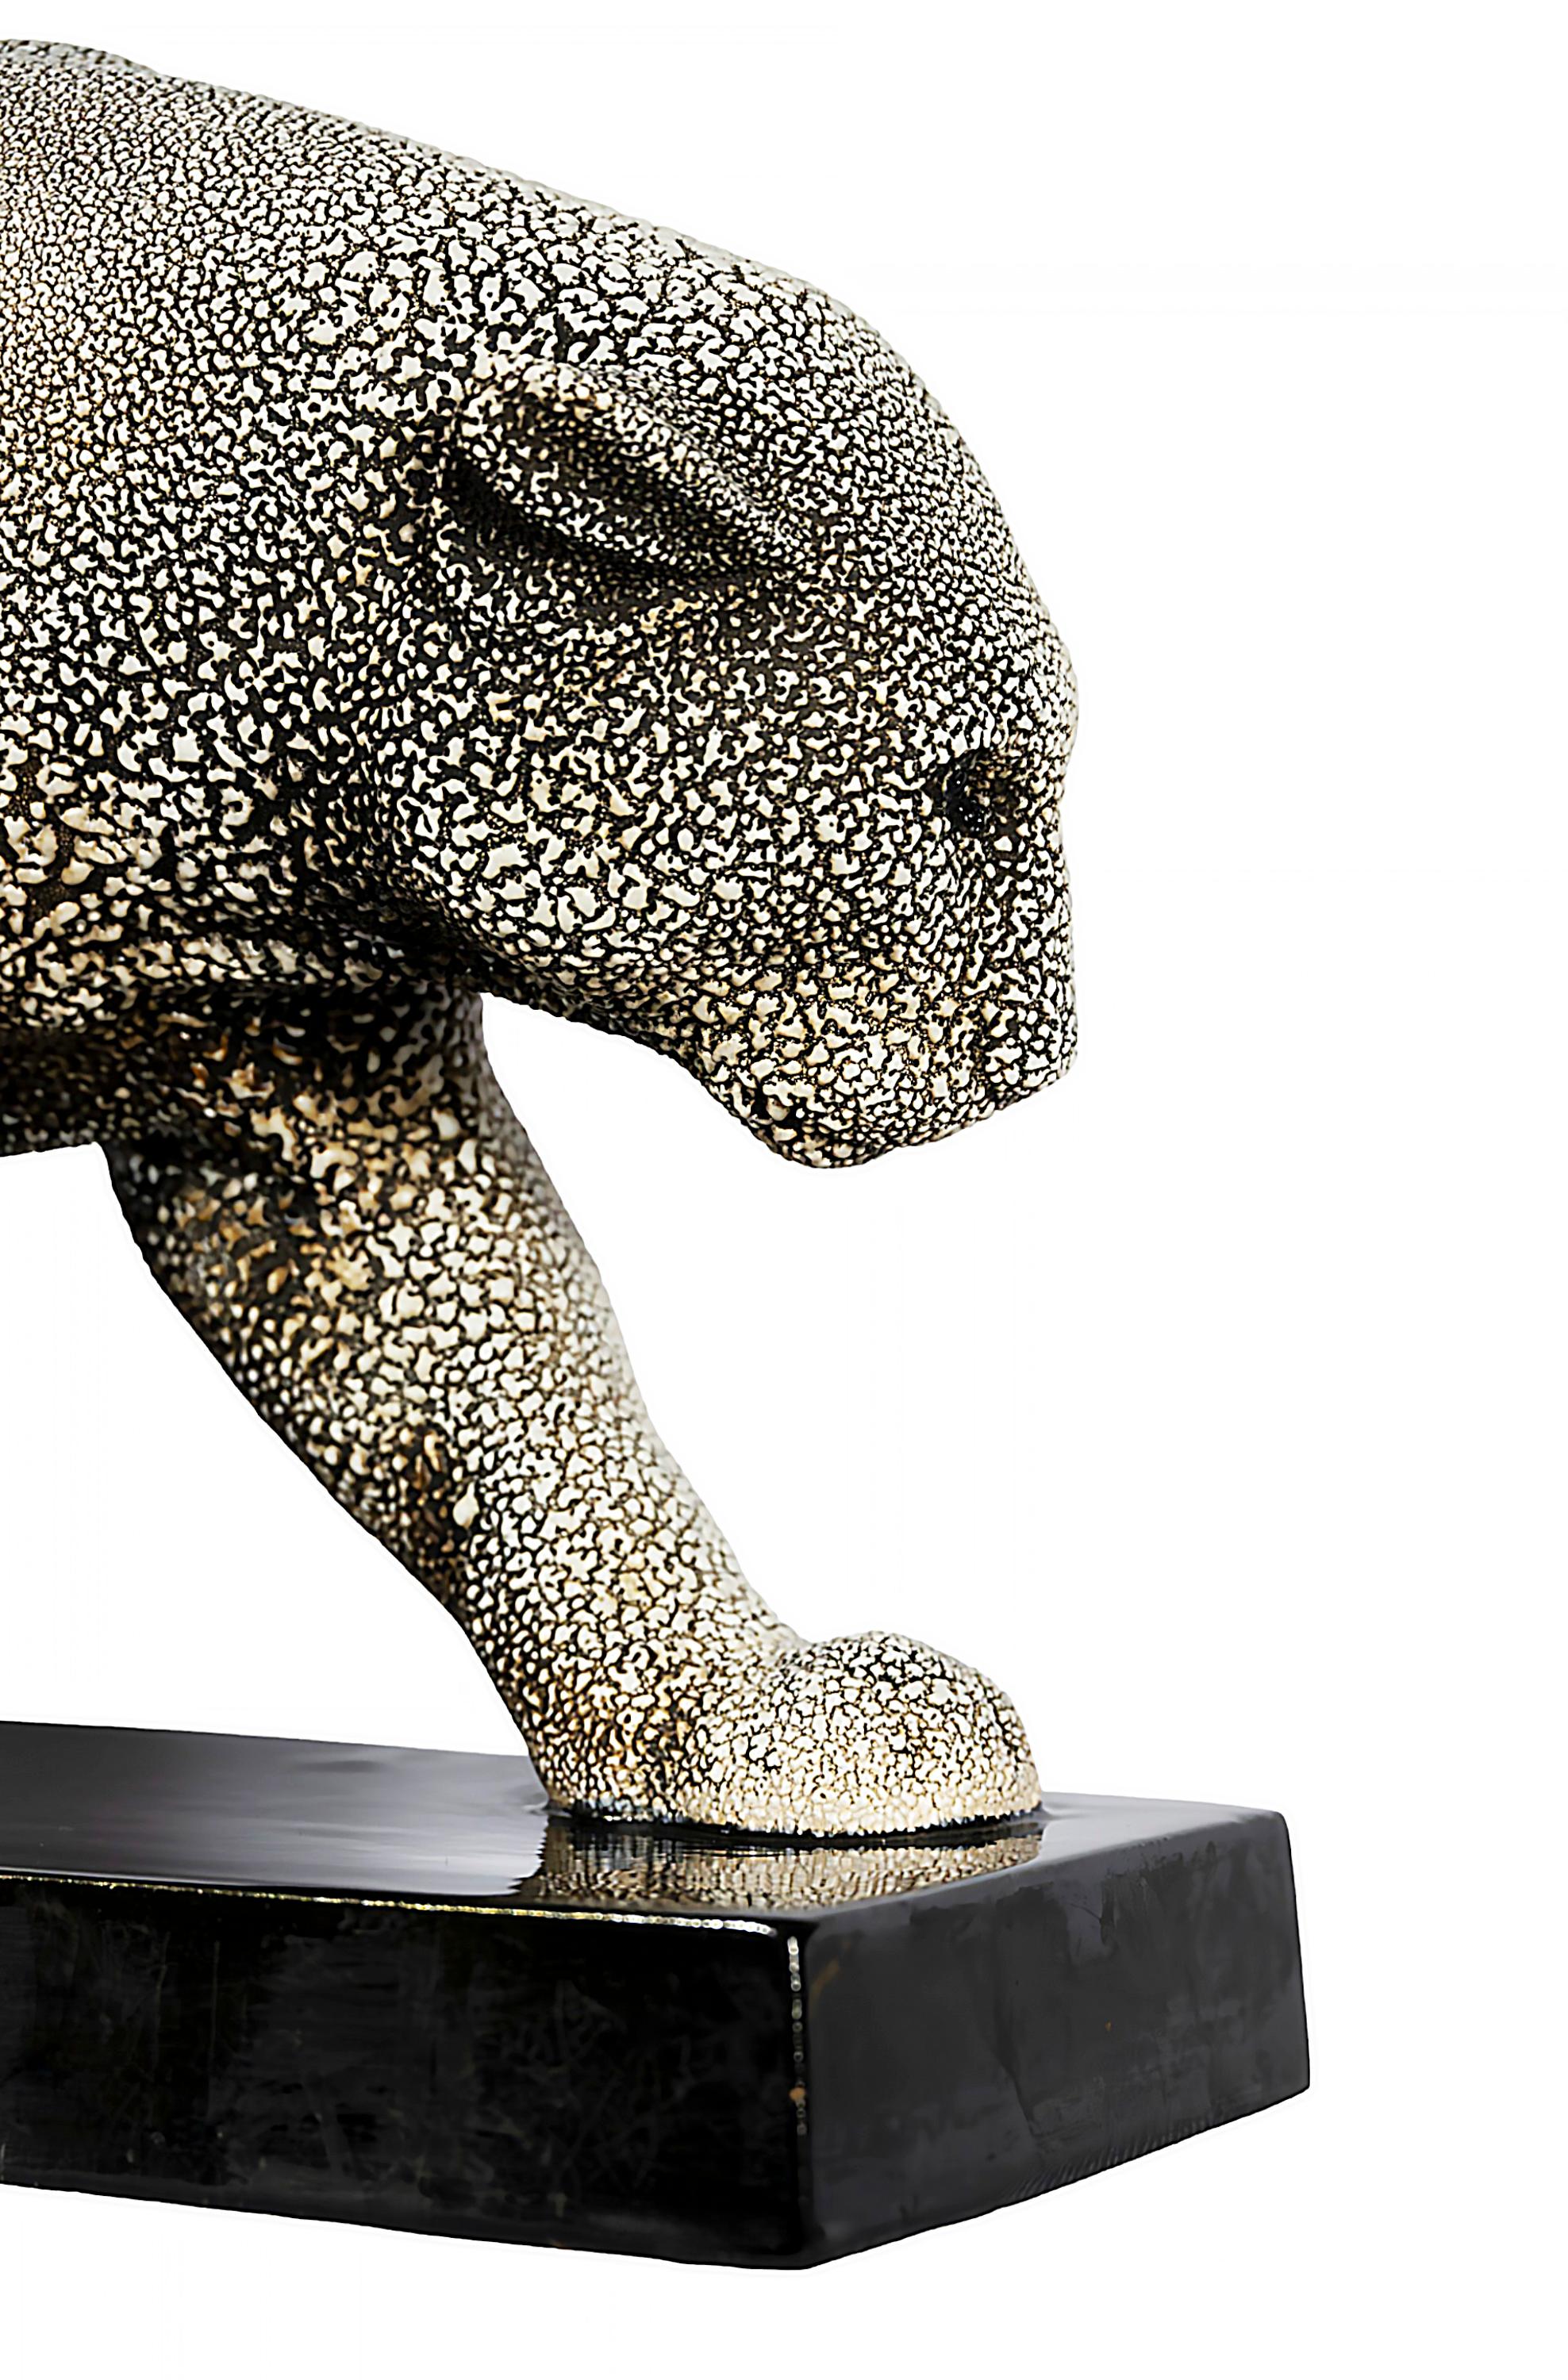 French Art Deco Ceramic Panther Sculpture by G.Beauvais for Edition Kaza, 1930's For Sale 3